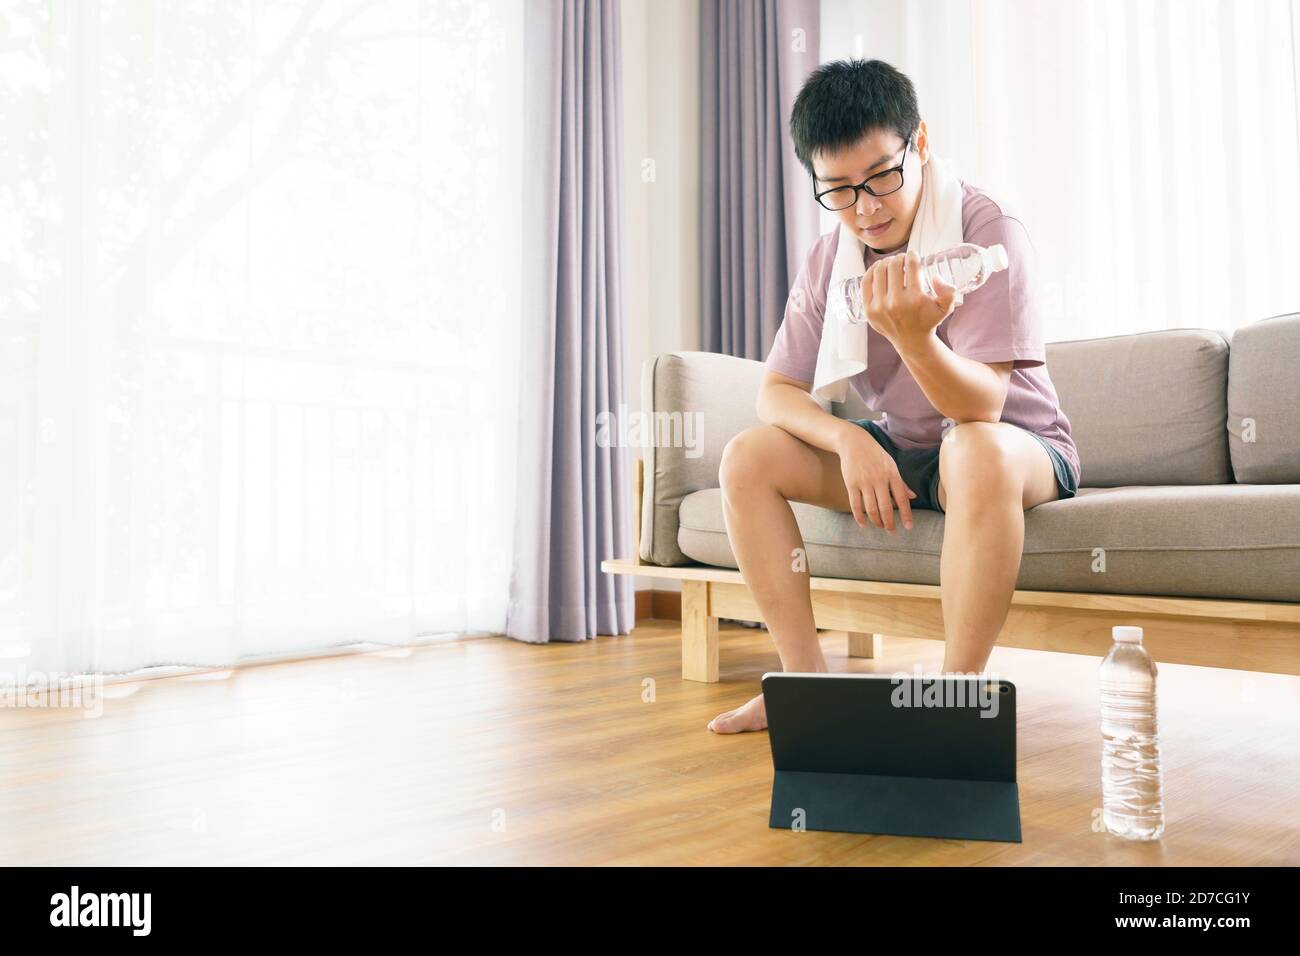 New normal Training At Home An Asian man, aged 35-40, with brown skin, Home exercise. exercising in living room. Stock Photo